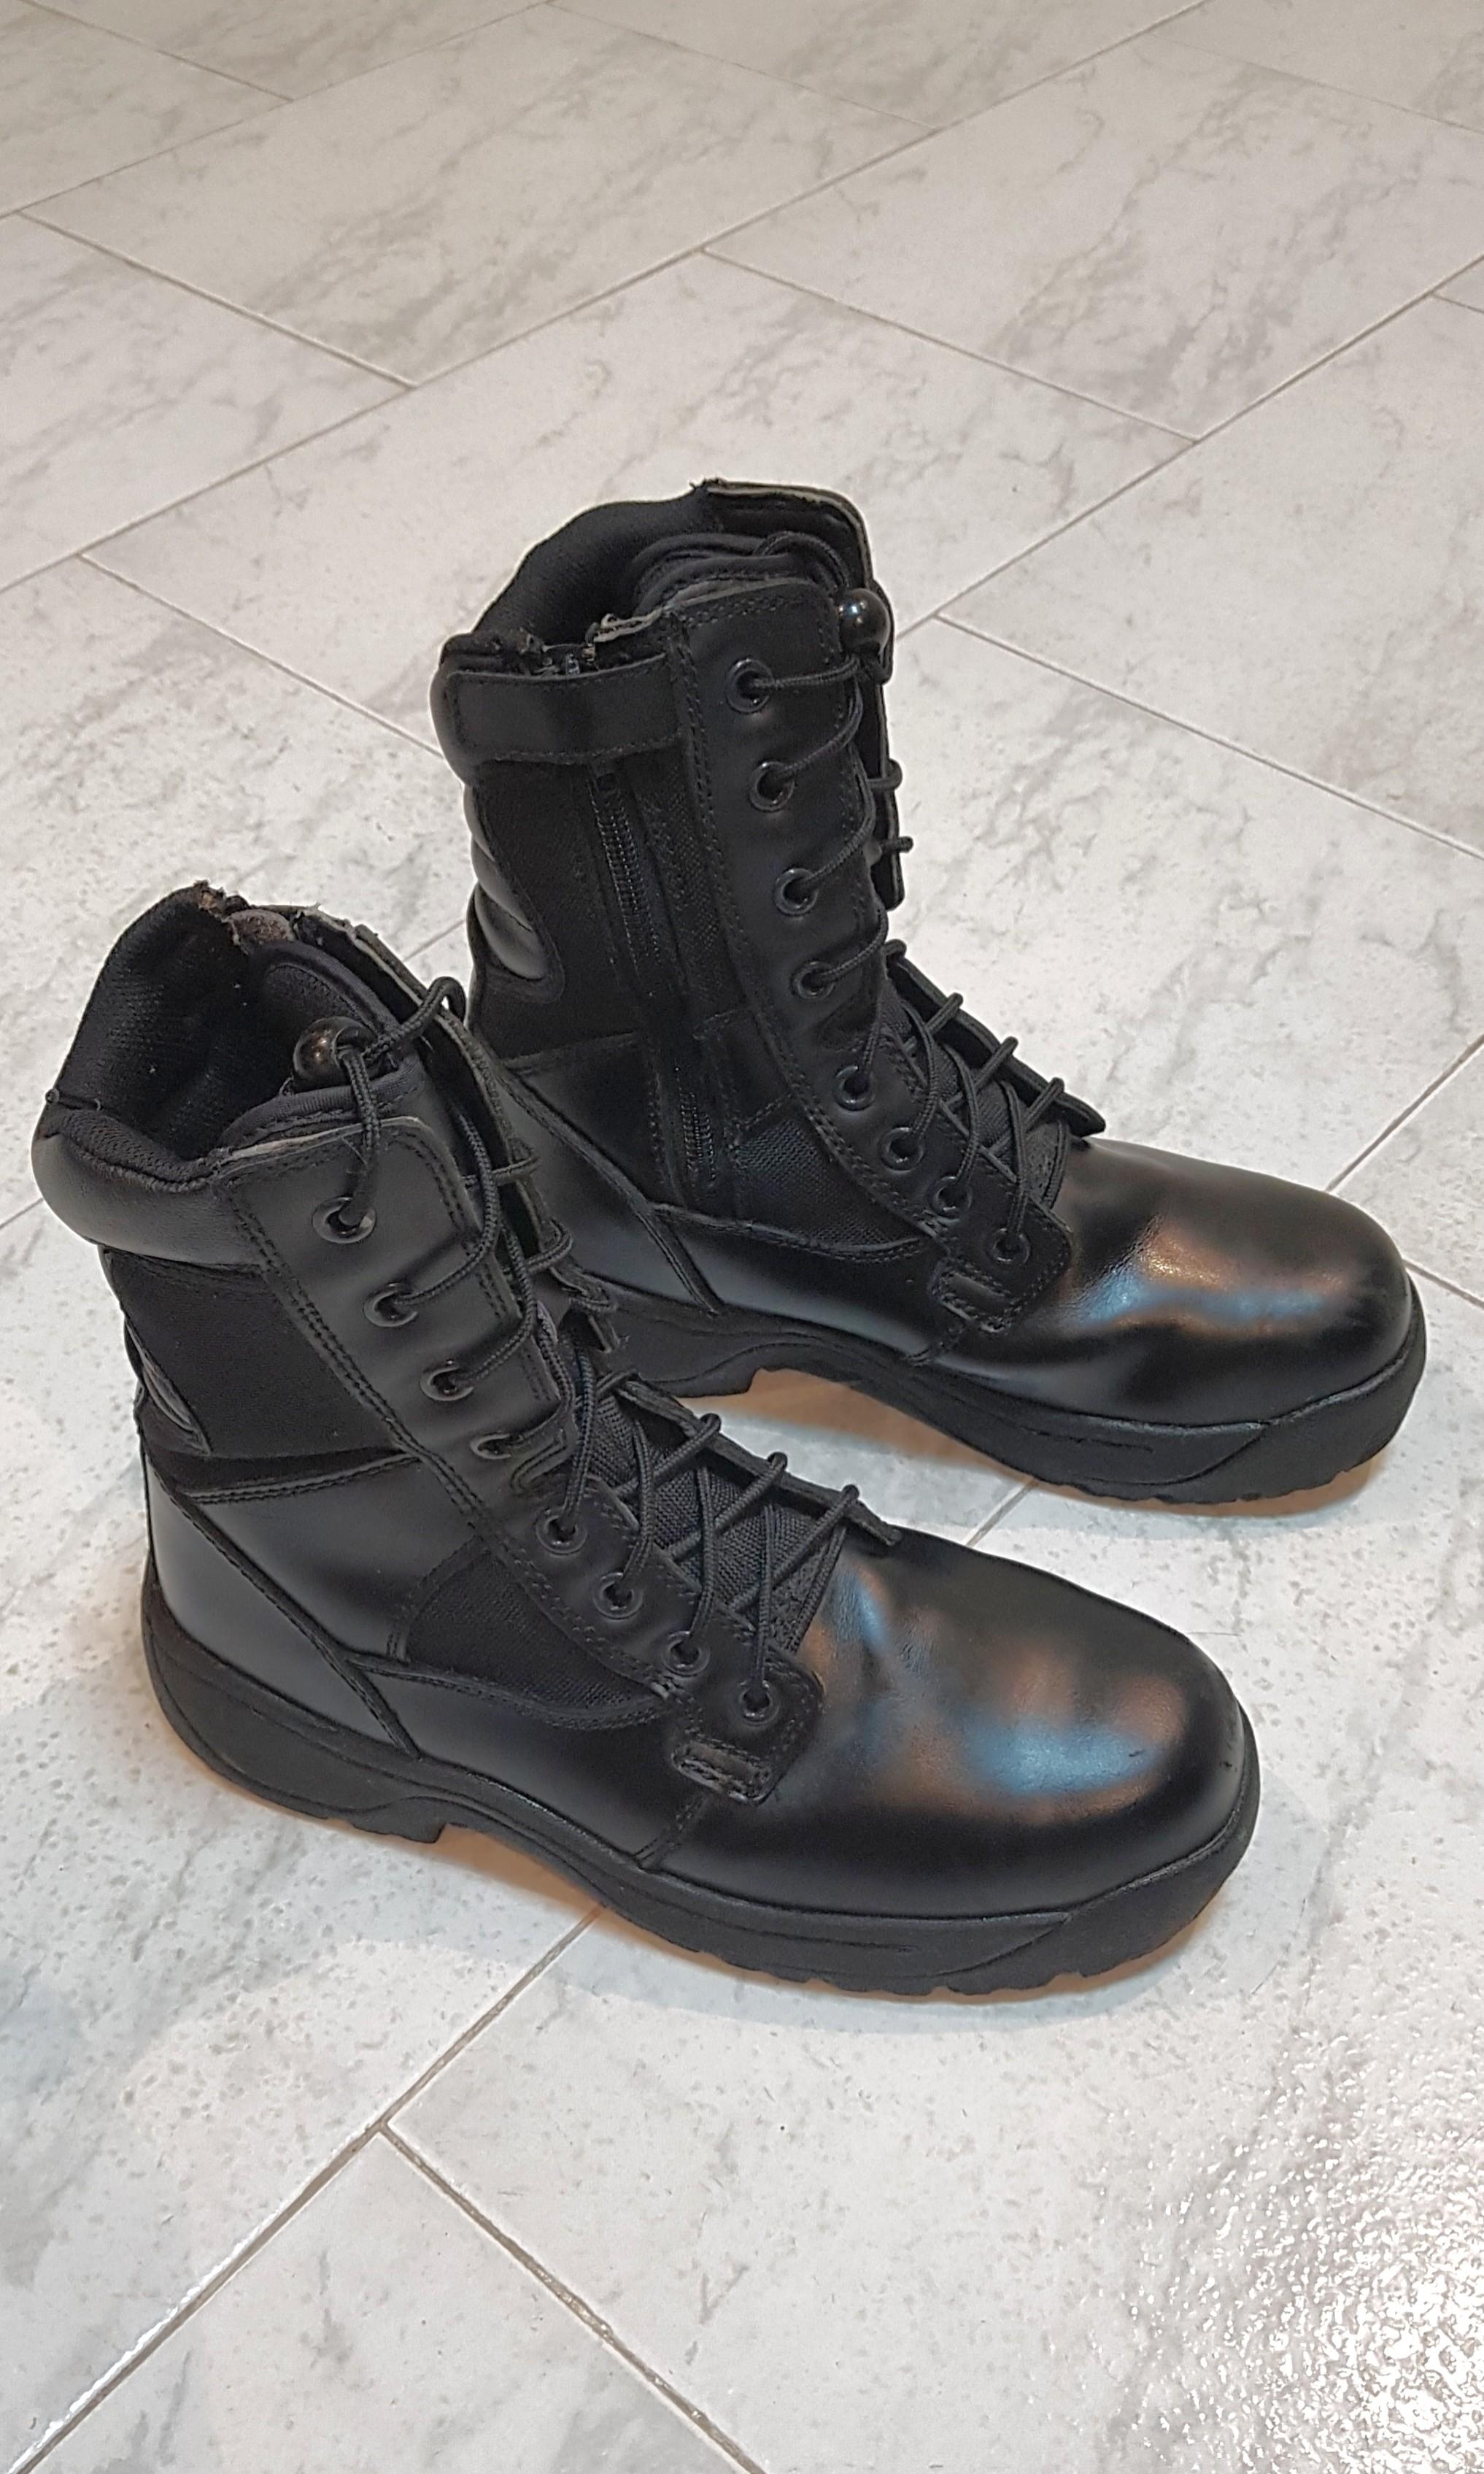 Frontier army safety boots (steel toe 